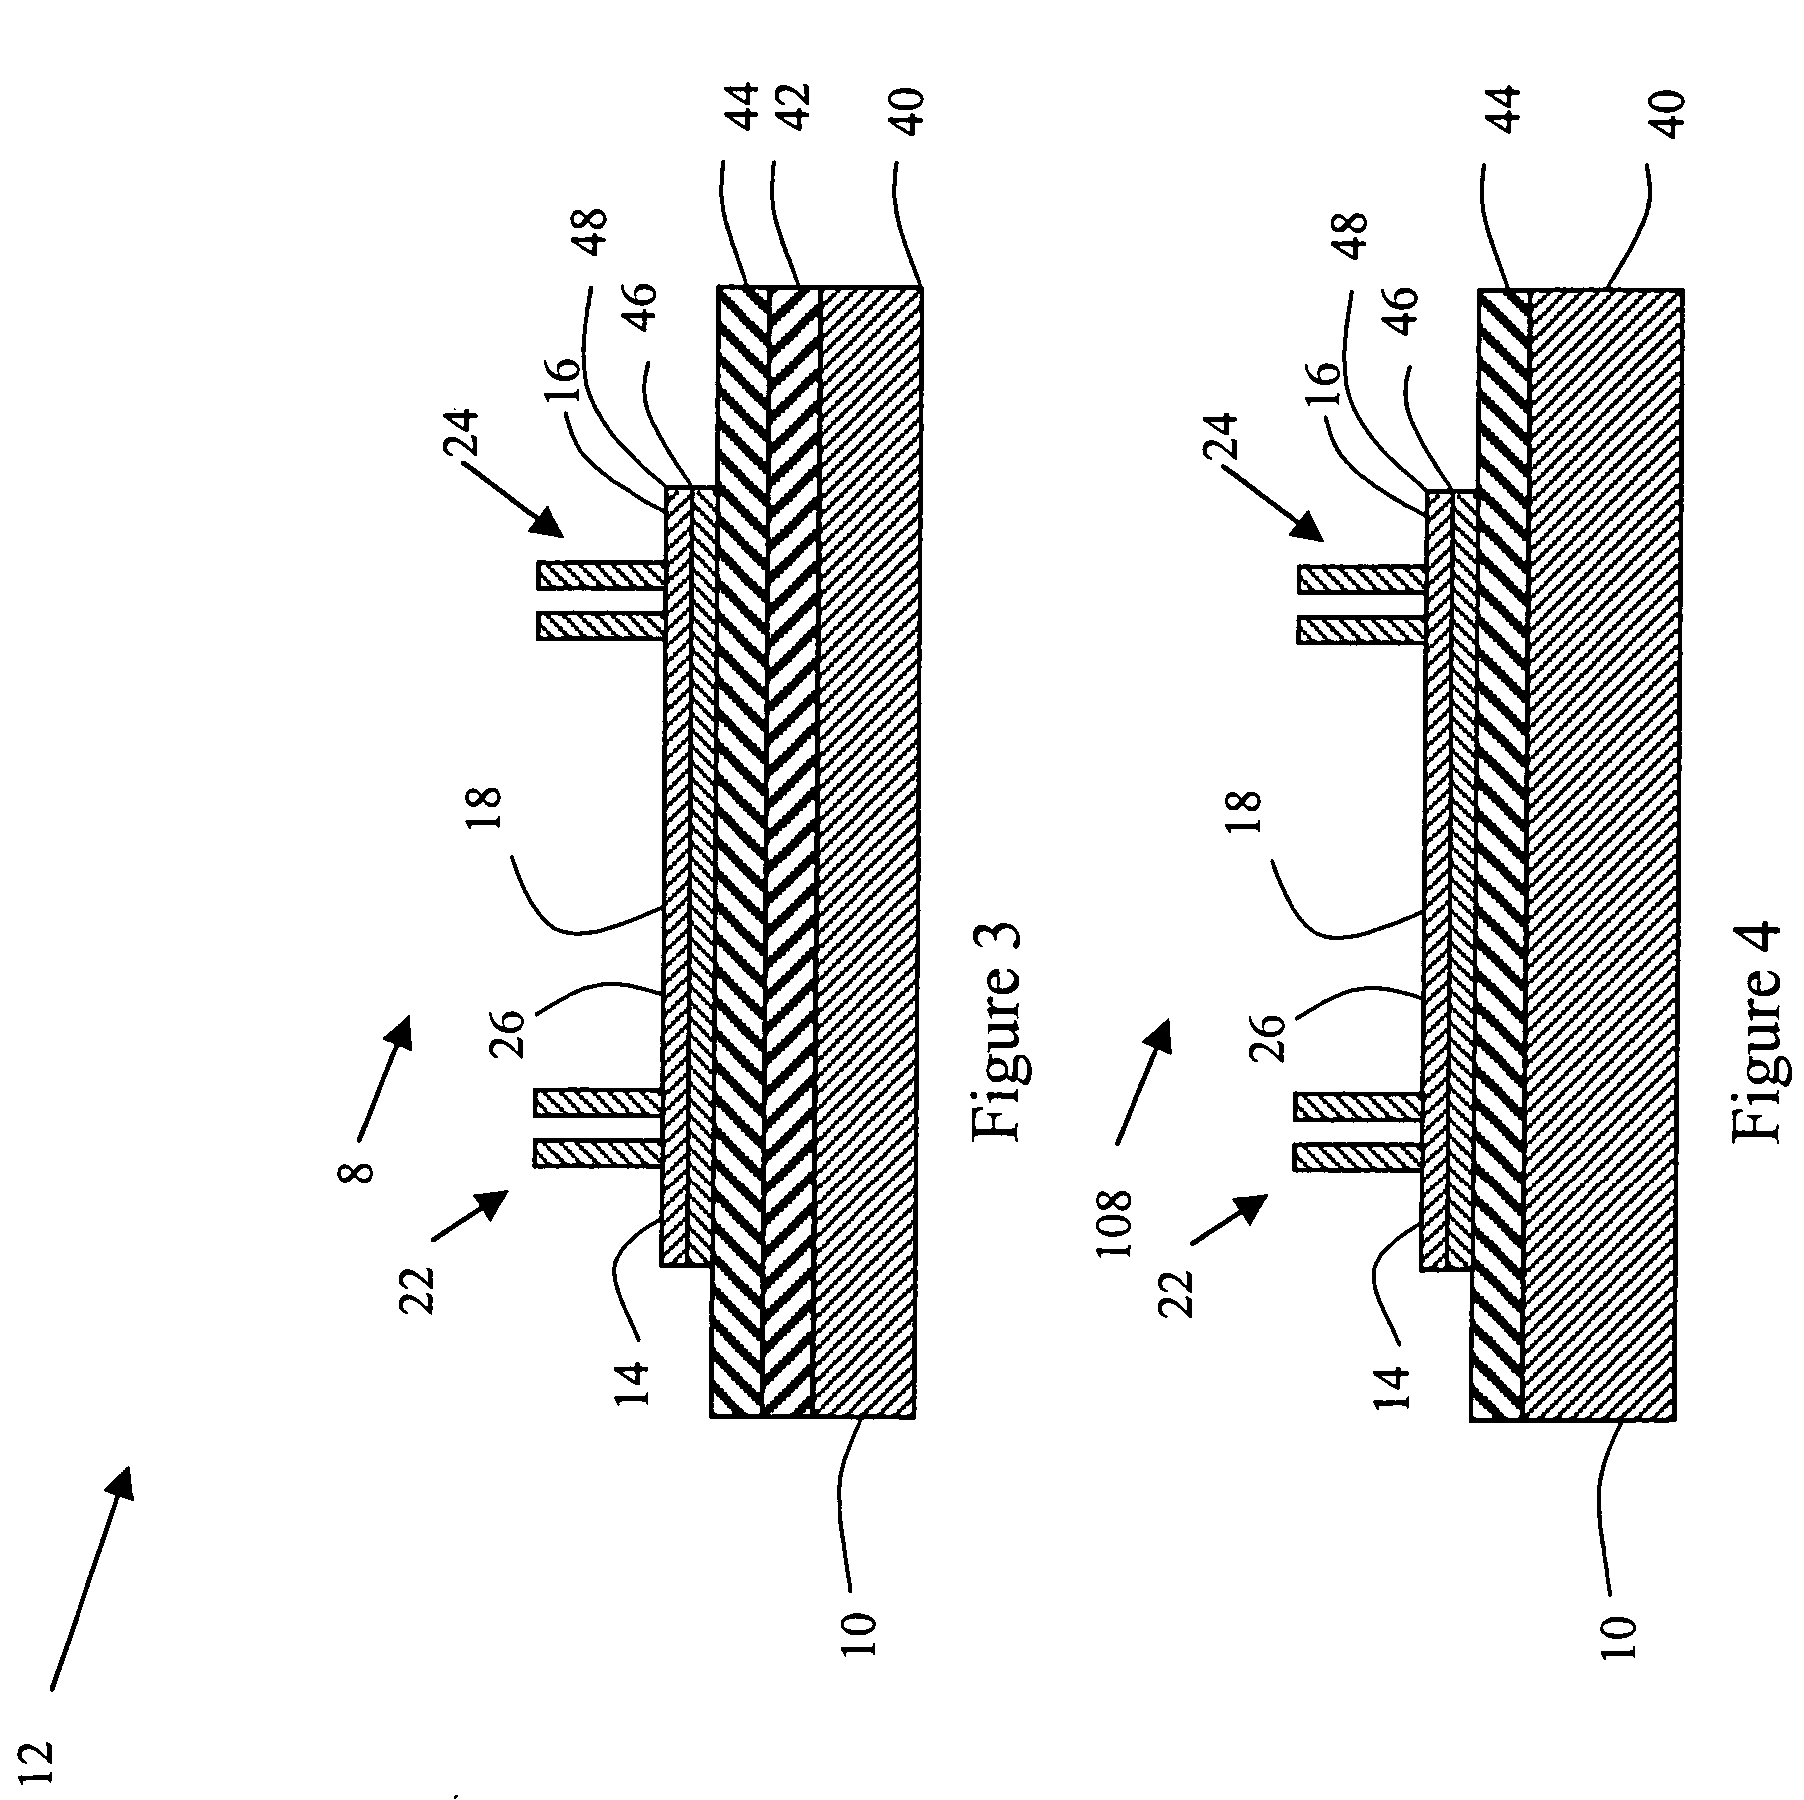 Integrated circuit with two phase fuse material and method of using and making same